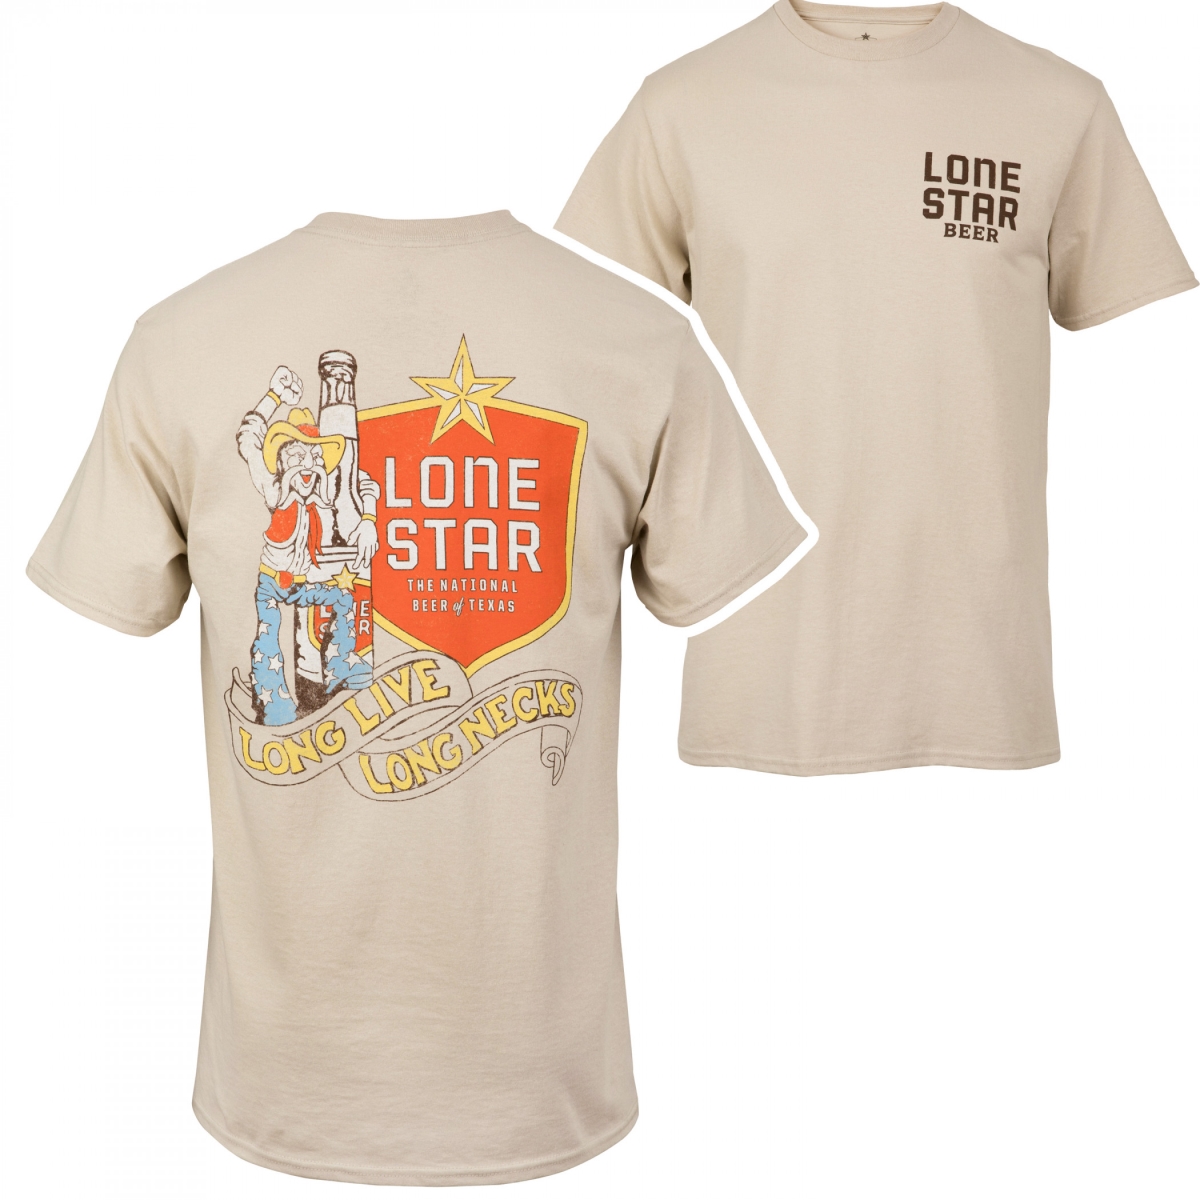 Picture of Lone Star 870172-2xlarge Lone Star Beer Long Live Long Necks Front & Back Print T-Shirt - 2XL